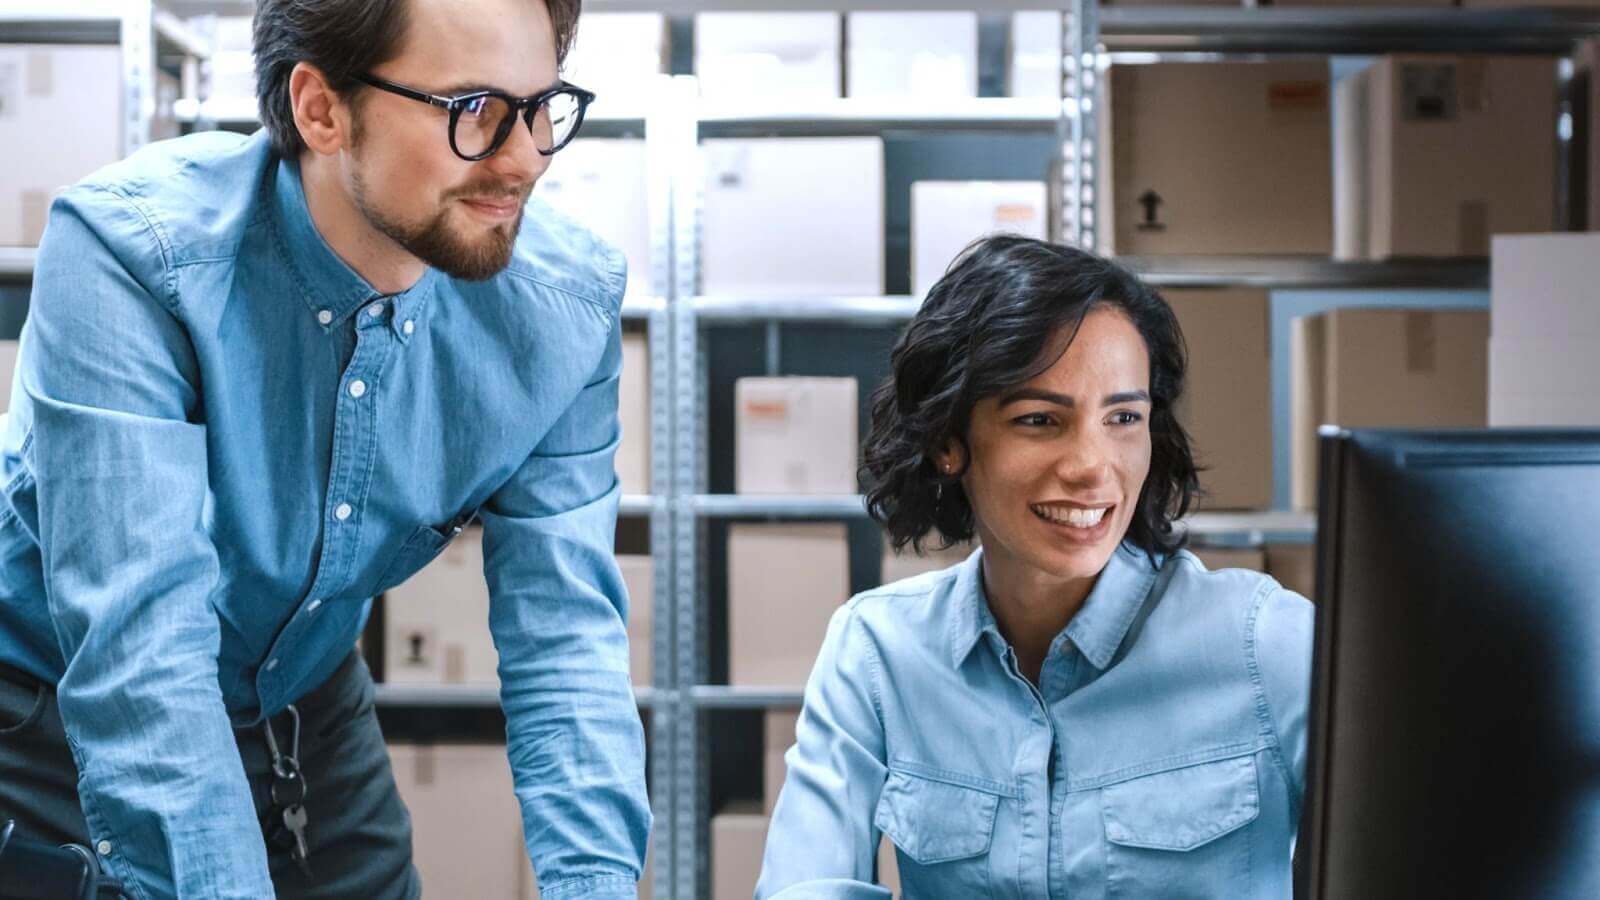 Man and woman in warehouse looking at computer screen